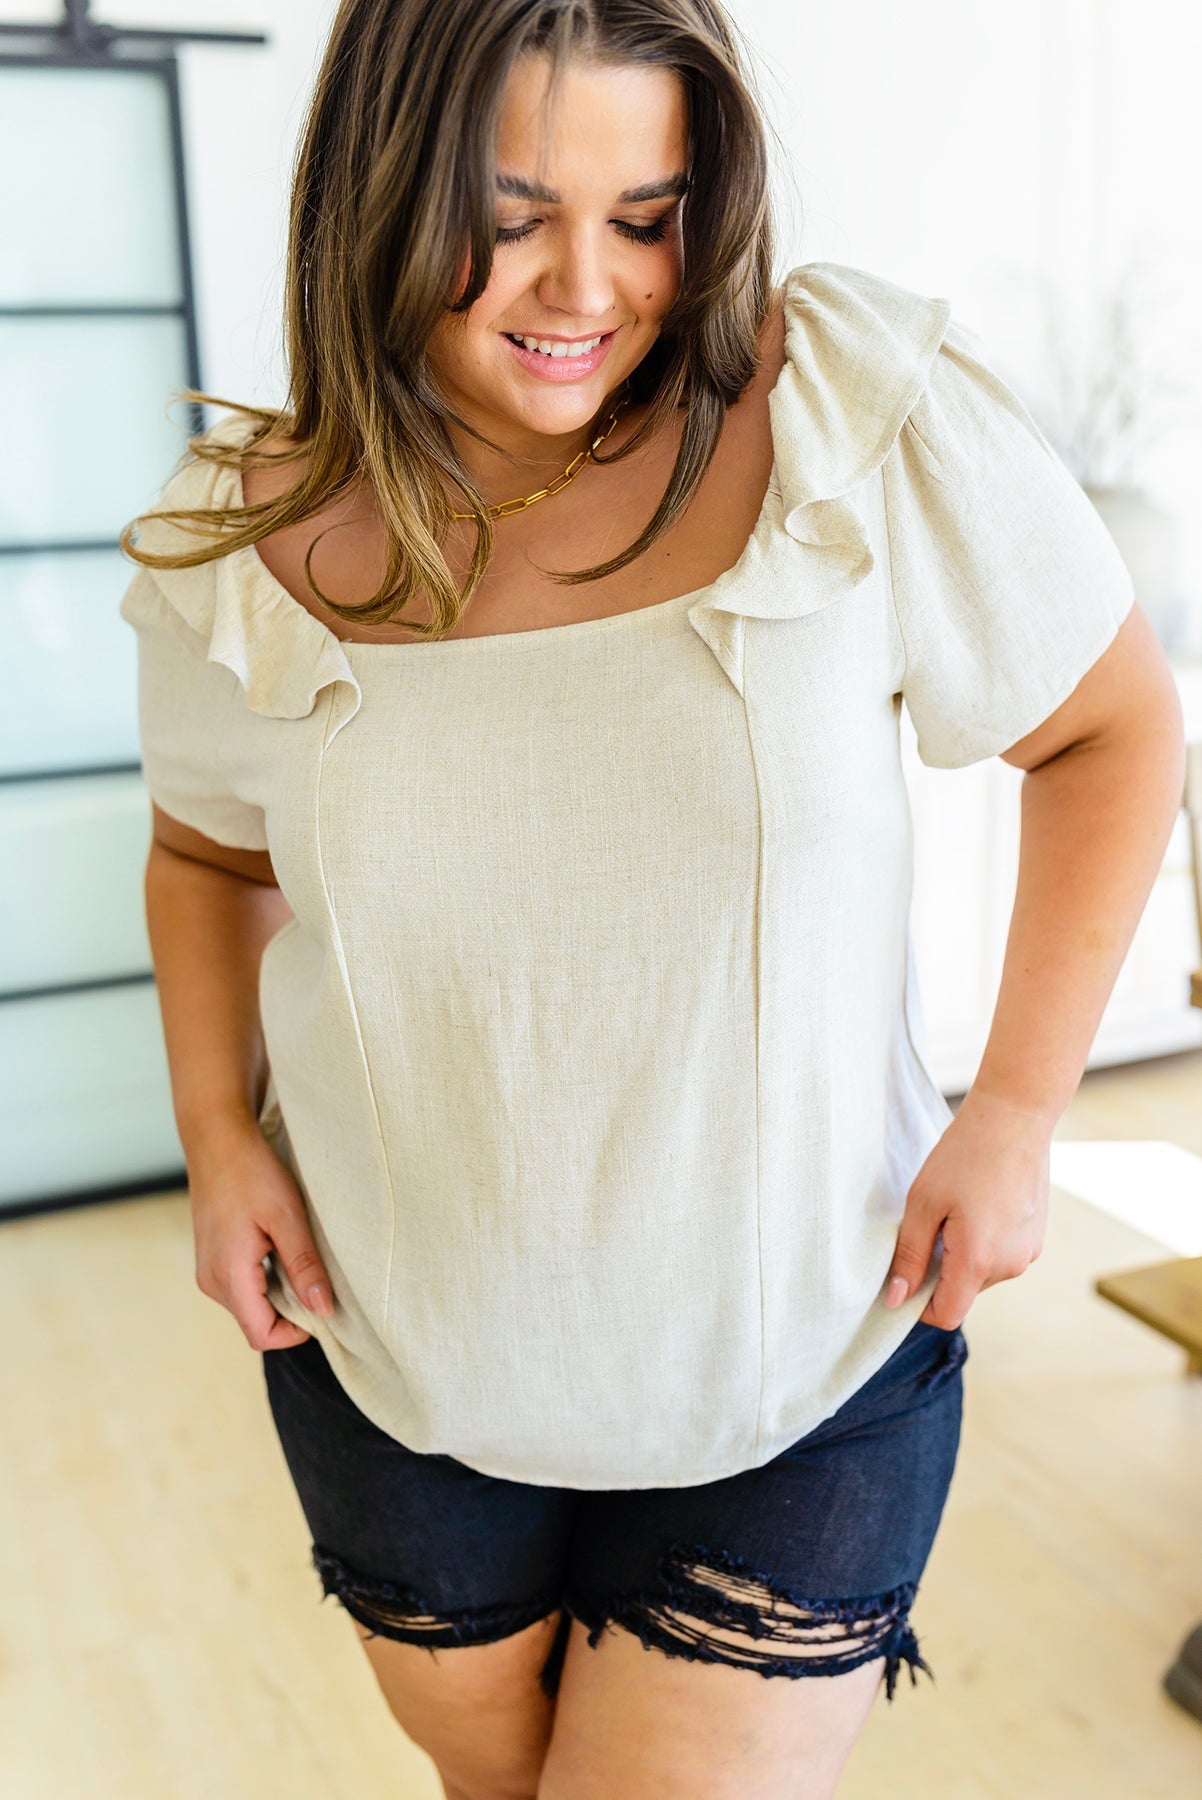 The Old Town Moments Top is so simple yet cute and will pair well with any bottoms! The square neckline and ruffle detail at the shoulders gives this top a feminine yet classy element. We promise you're going to love it! S - 3X